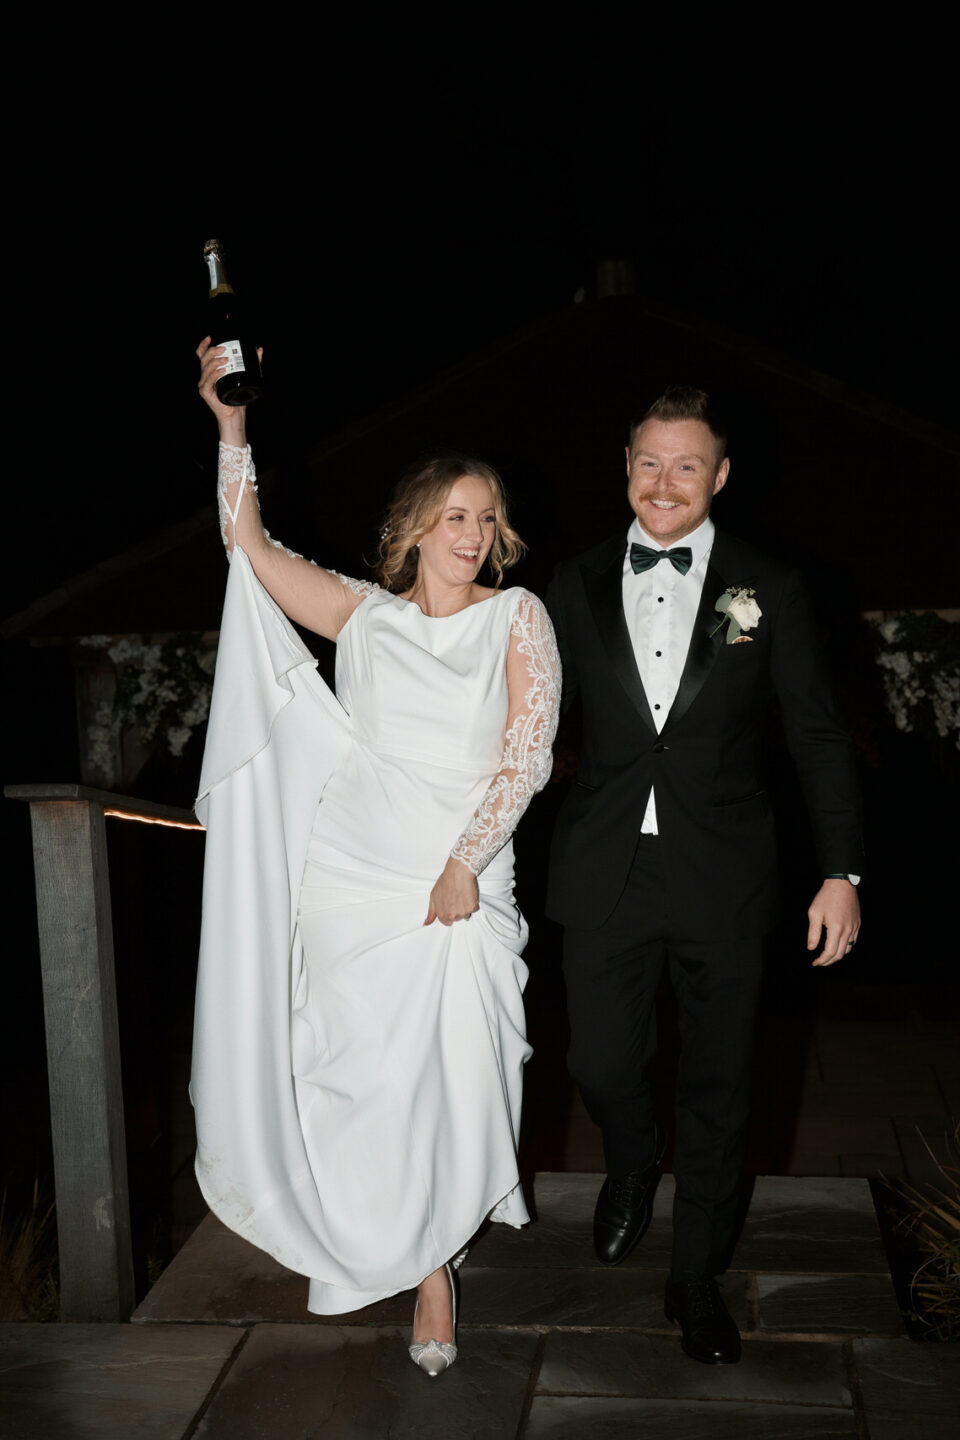 A couple getting married is holding a bottle of wine at night.